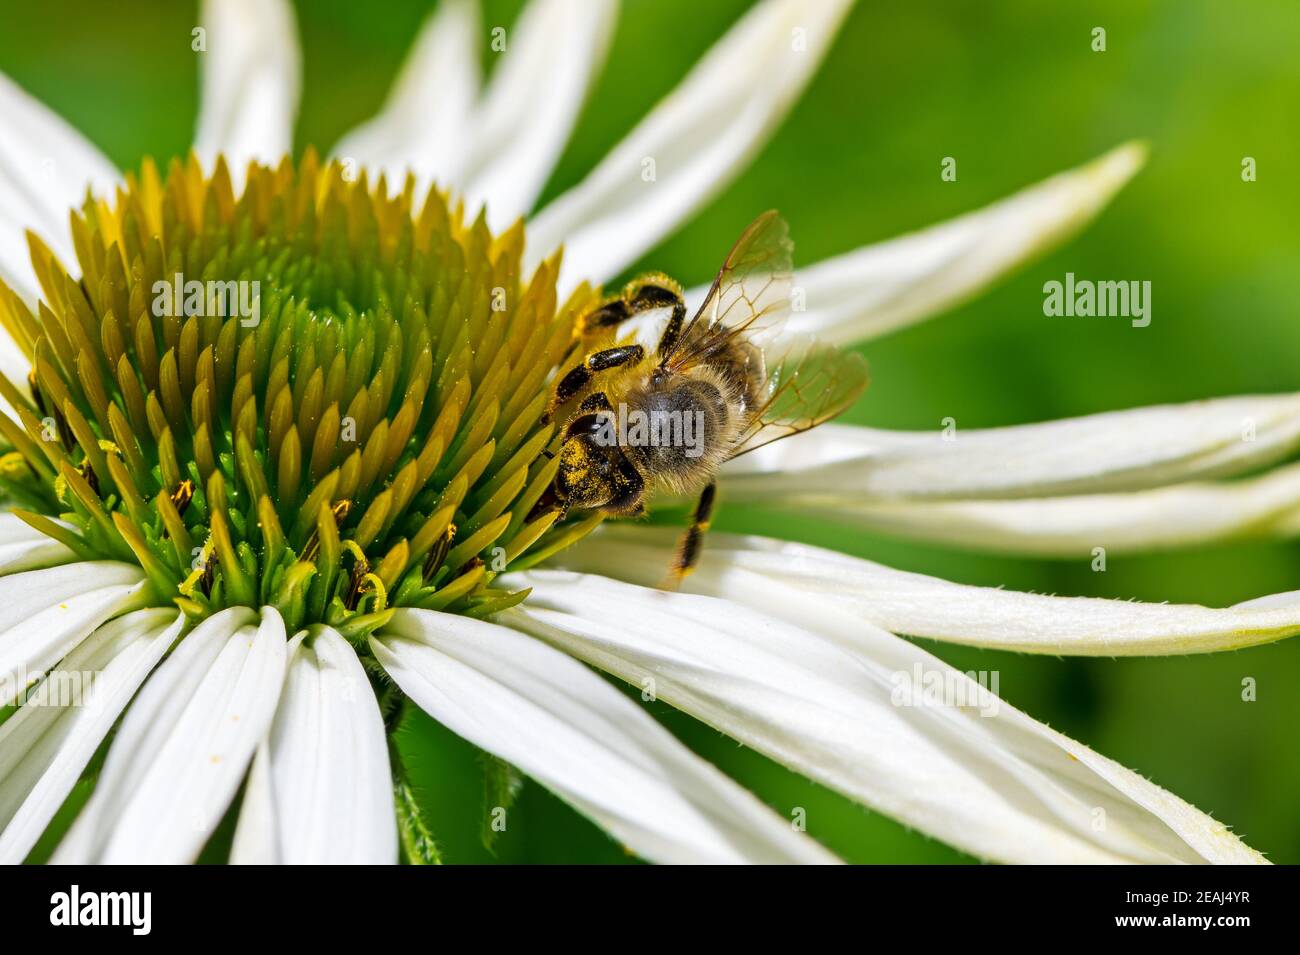 Honeybee collecting nectar on a echinacea flower blossom Stock Photo